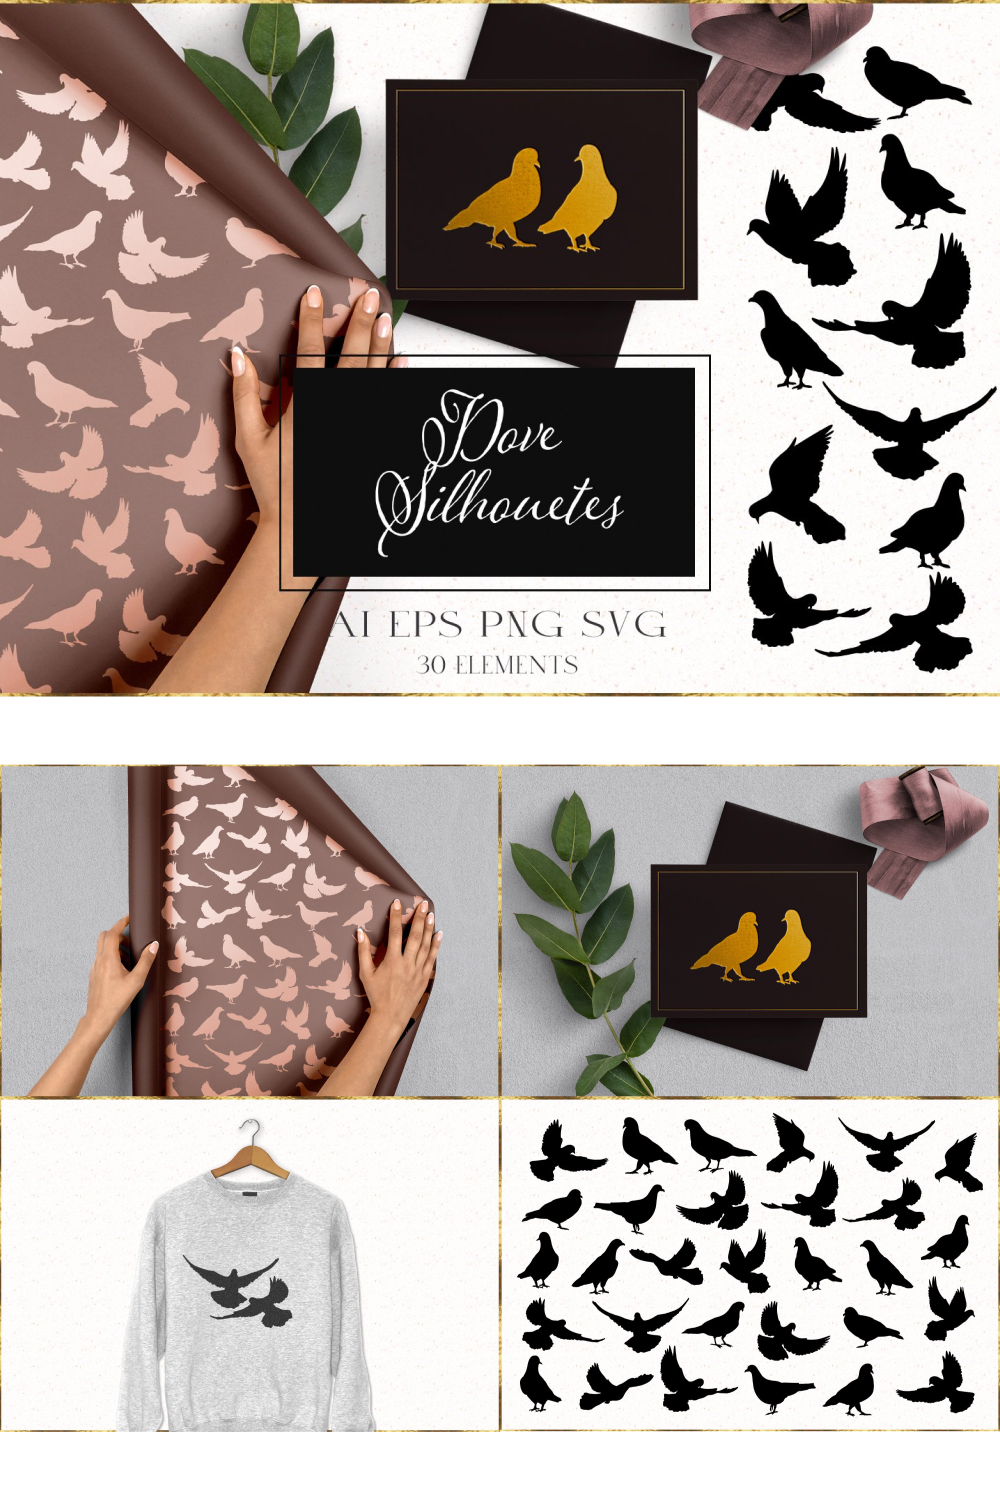 Dove silhouettes of pinterest.